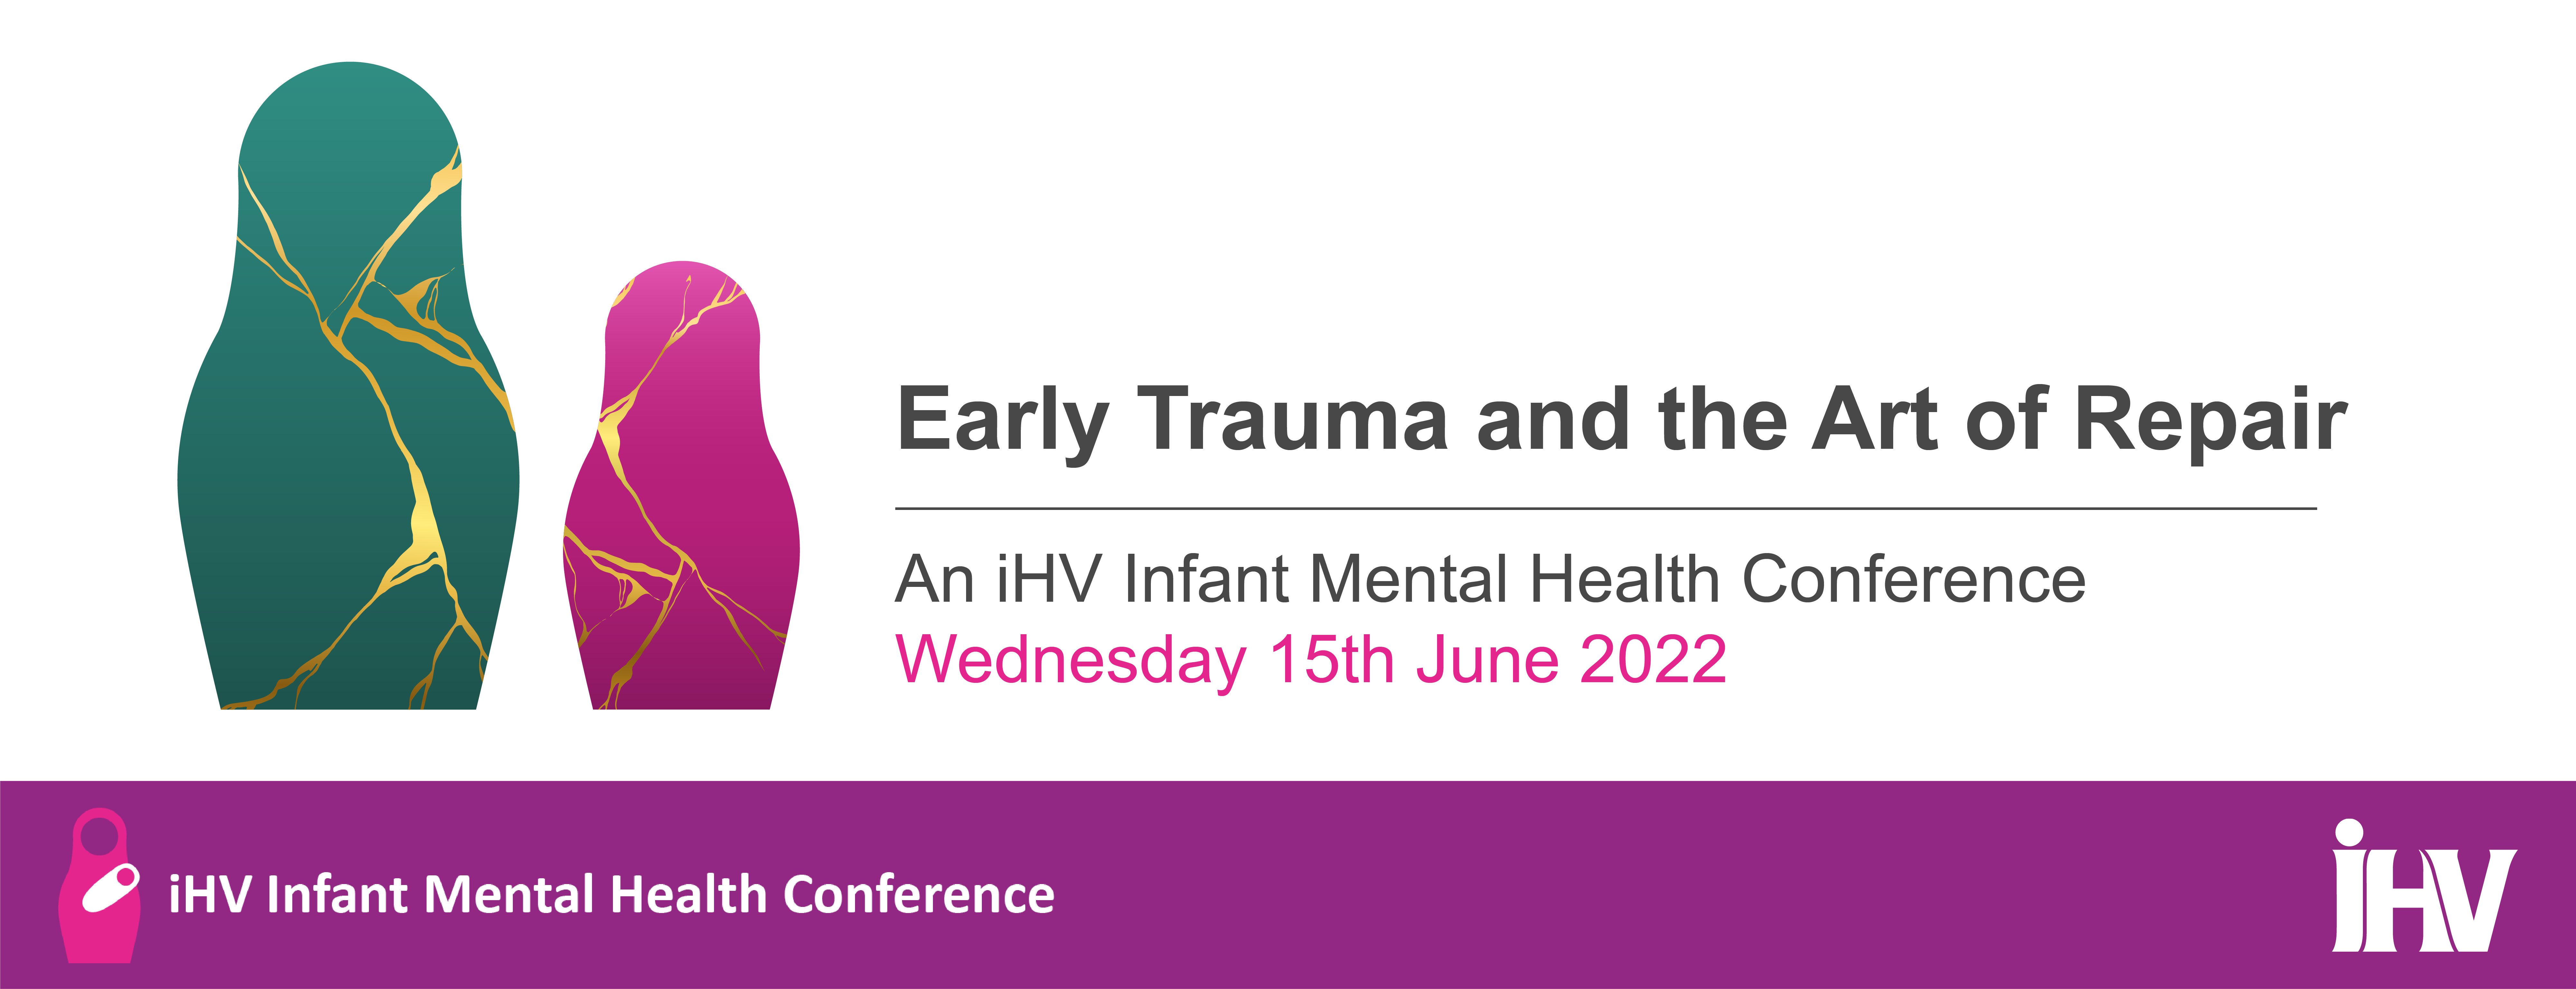 iHV Infant Mental Health Conference: Early Trauma and the Art of Repair